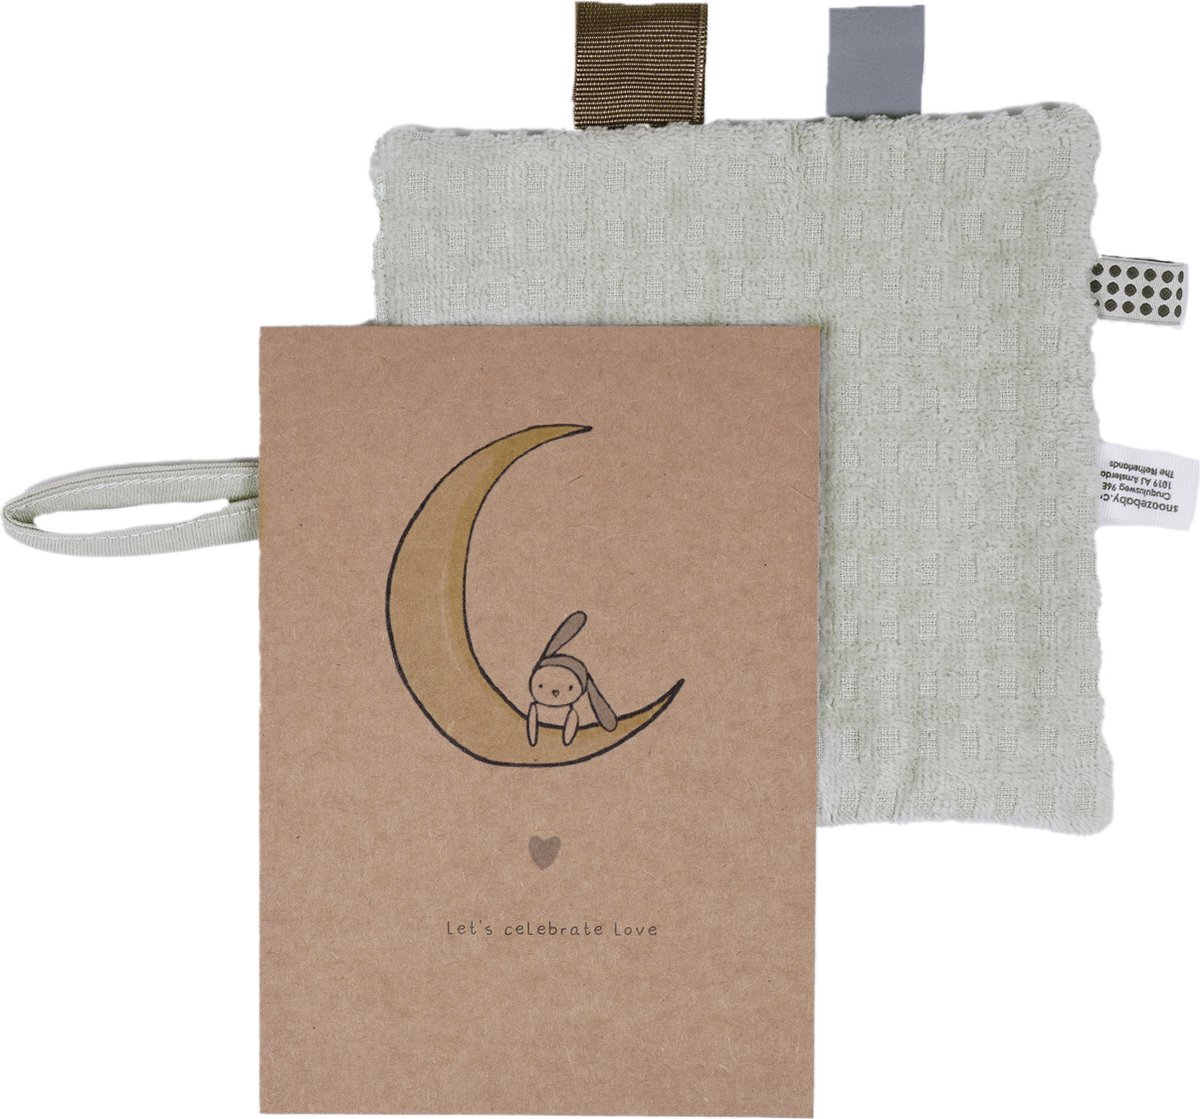 Snoozebaby Giftcard Mystic Mint - let's celebrate love